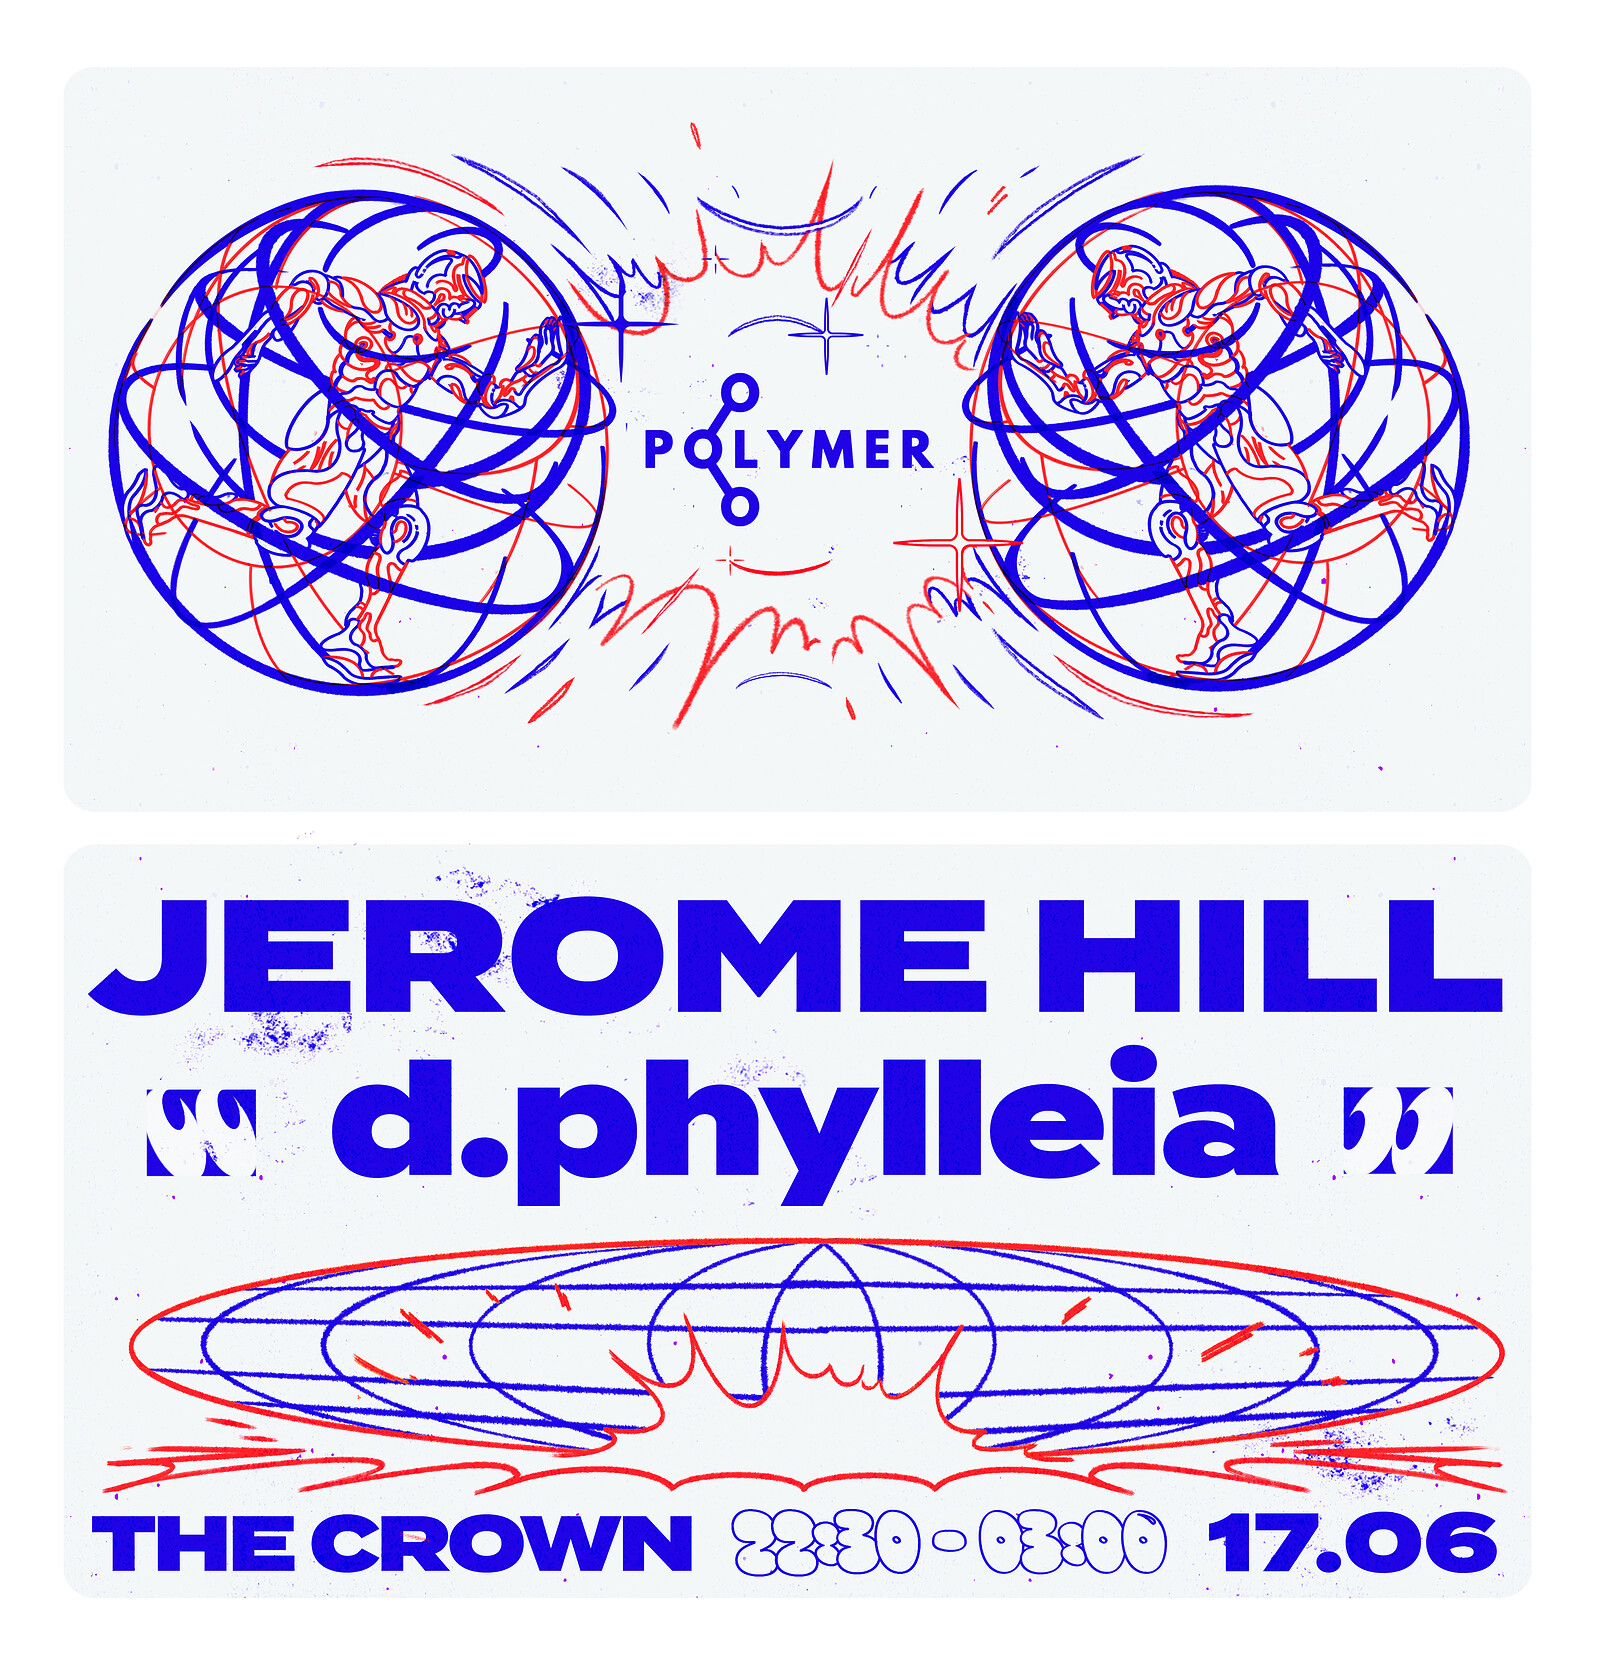 Polymer W/ Jerome Hill and d.phylleia at The Crown